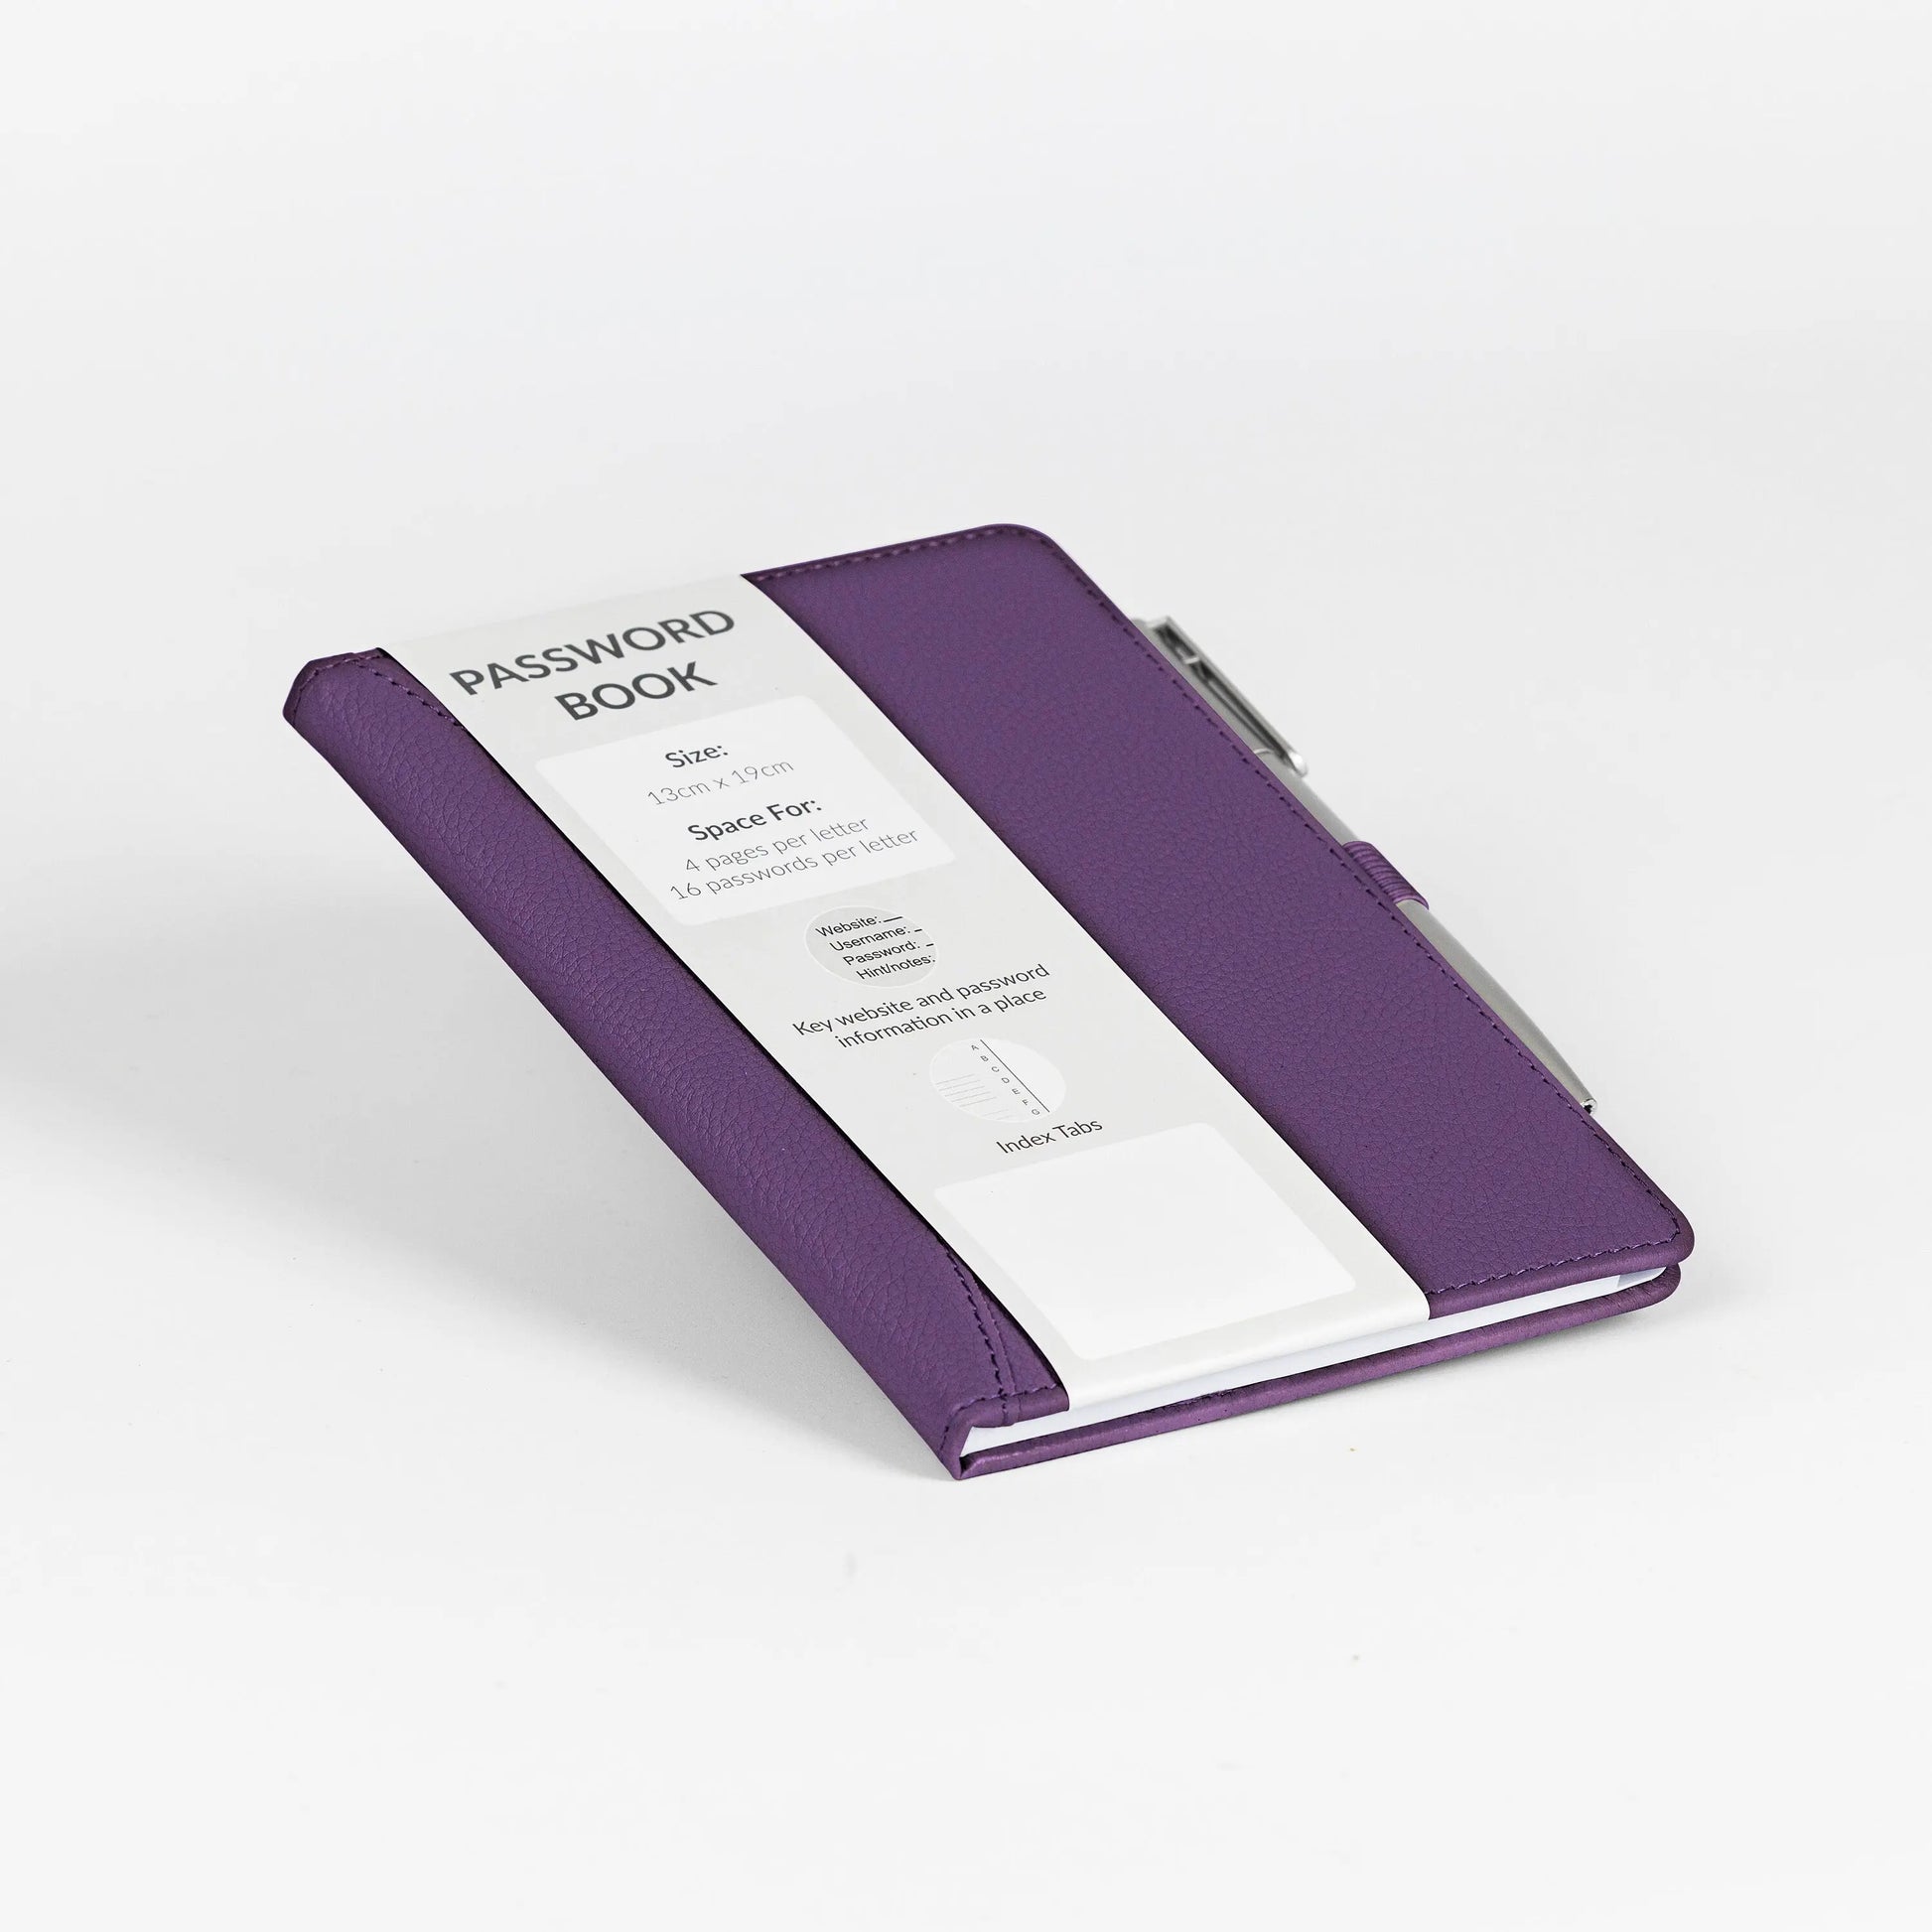 Password Username Book A-Z Index Tabs Hard Back Contact Book With Pen Purple Keechi & co.